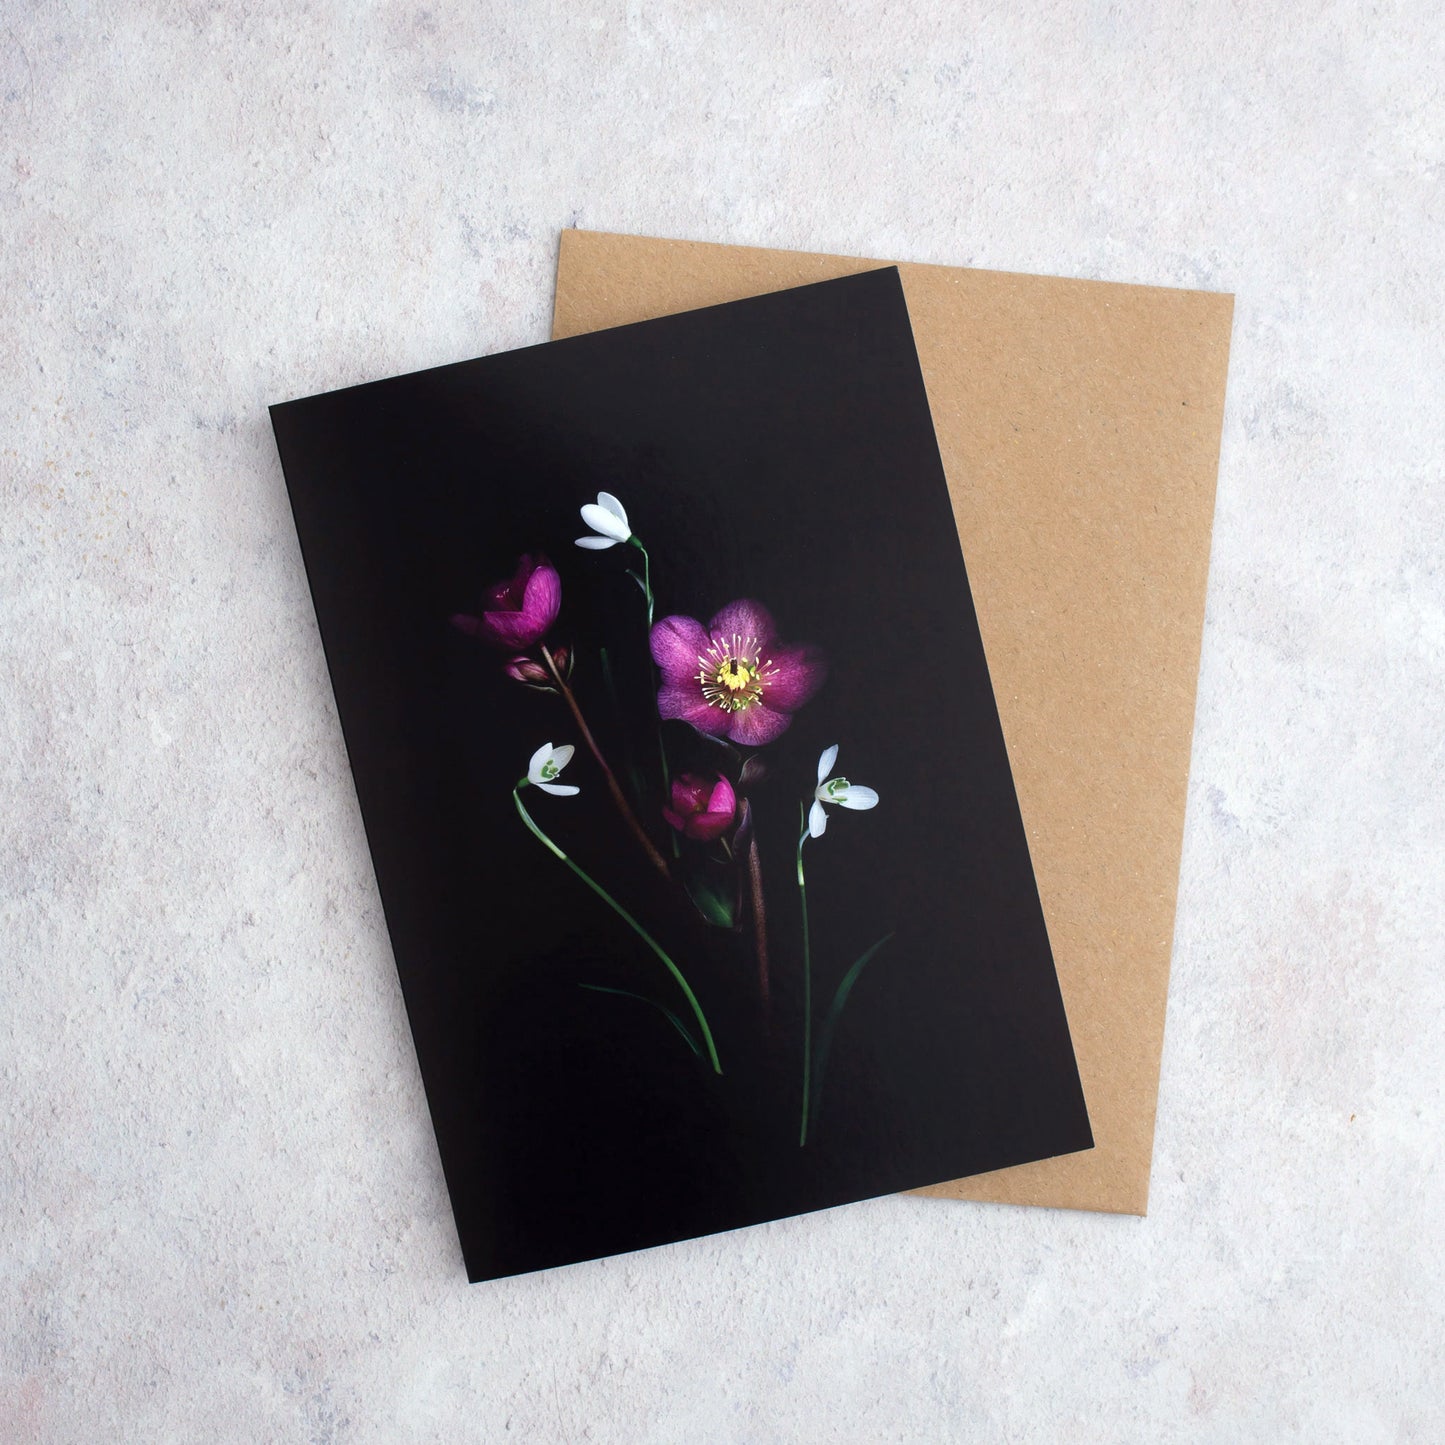 Botanical greeting card featuring  Pink Hellebores and Snowdrops photographed on a black background.